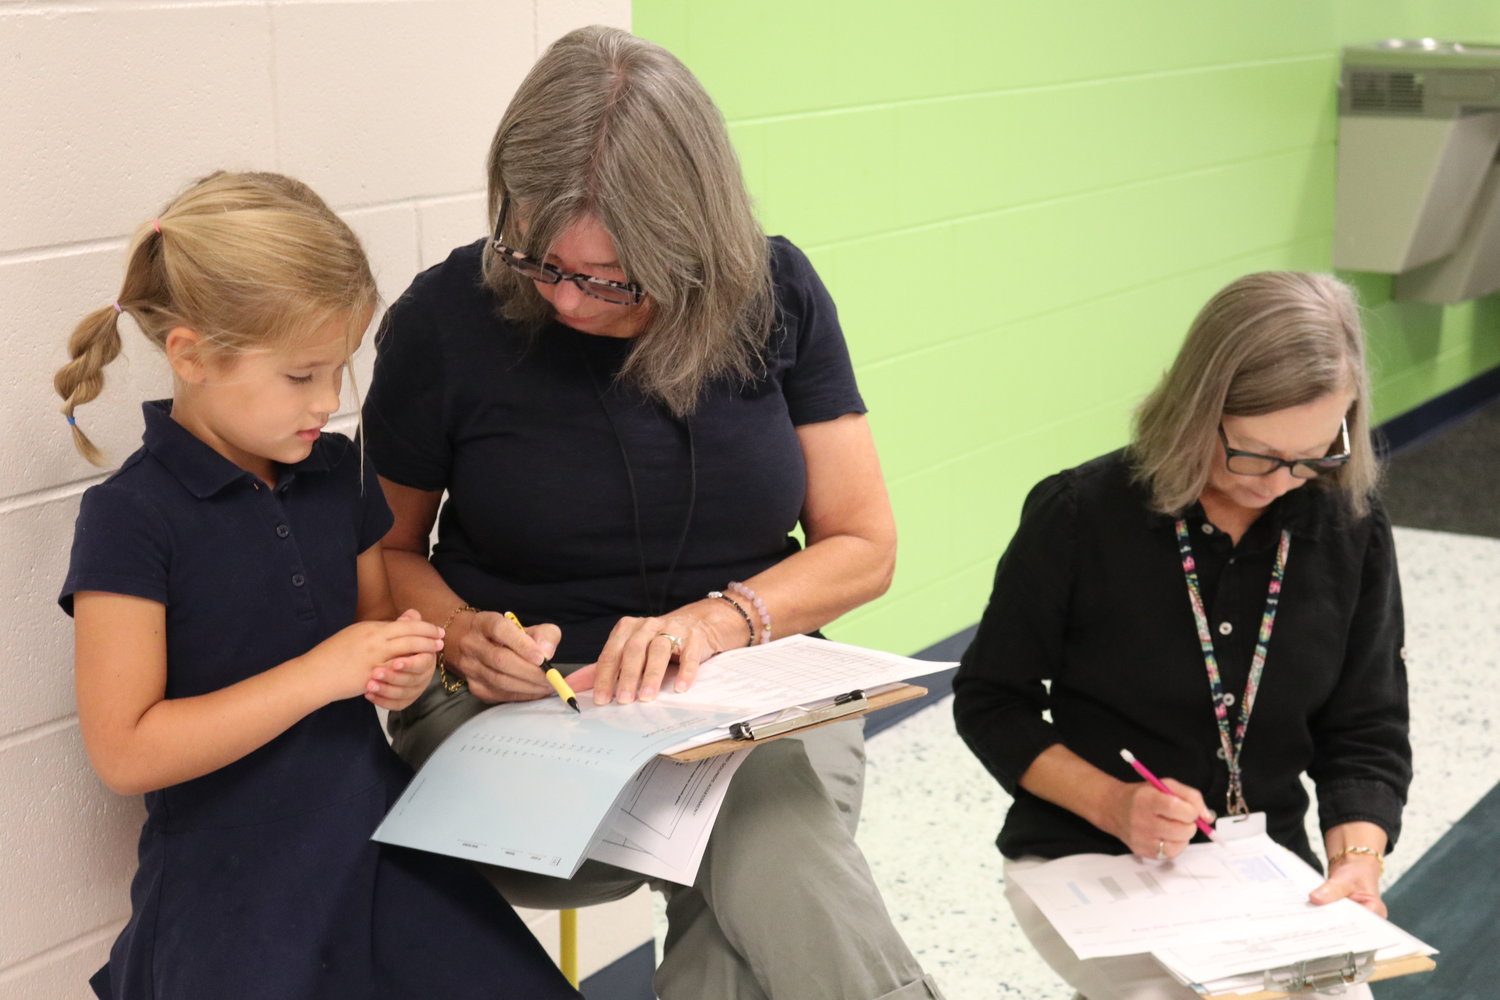 Part-time interventionalists, often retired teachers, offer one-on-one time with children to assist them in reading or other areas.